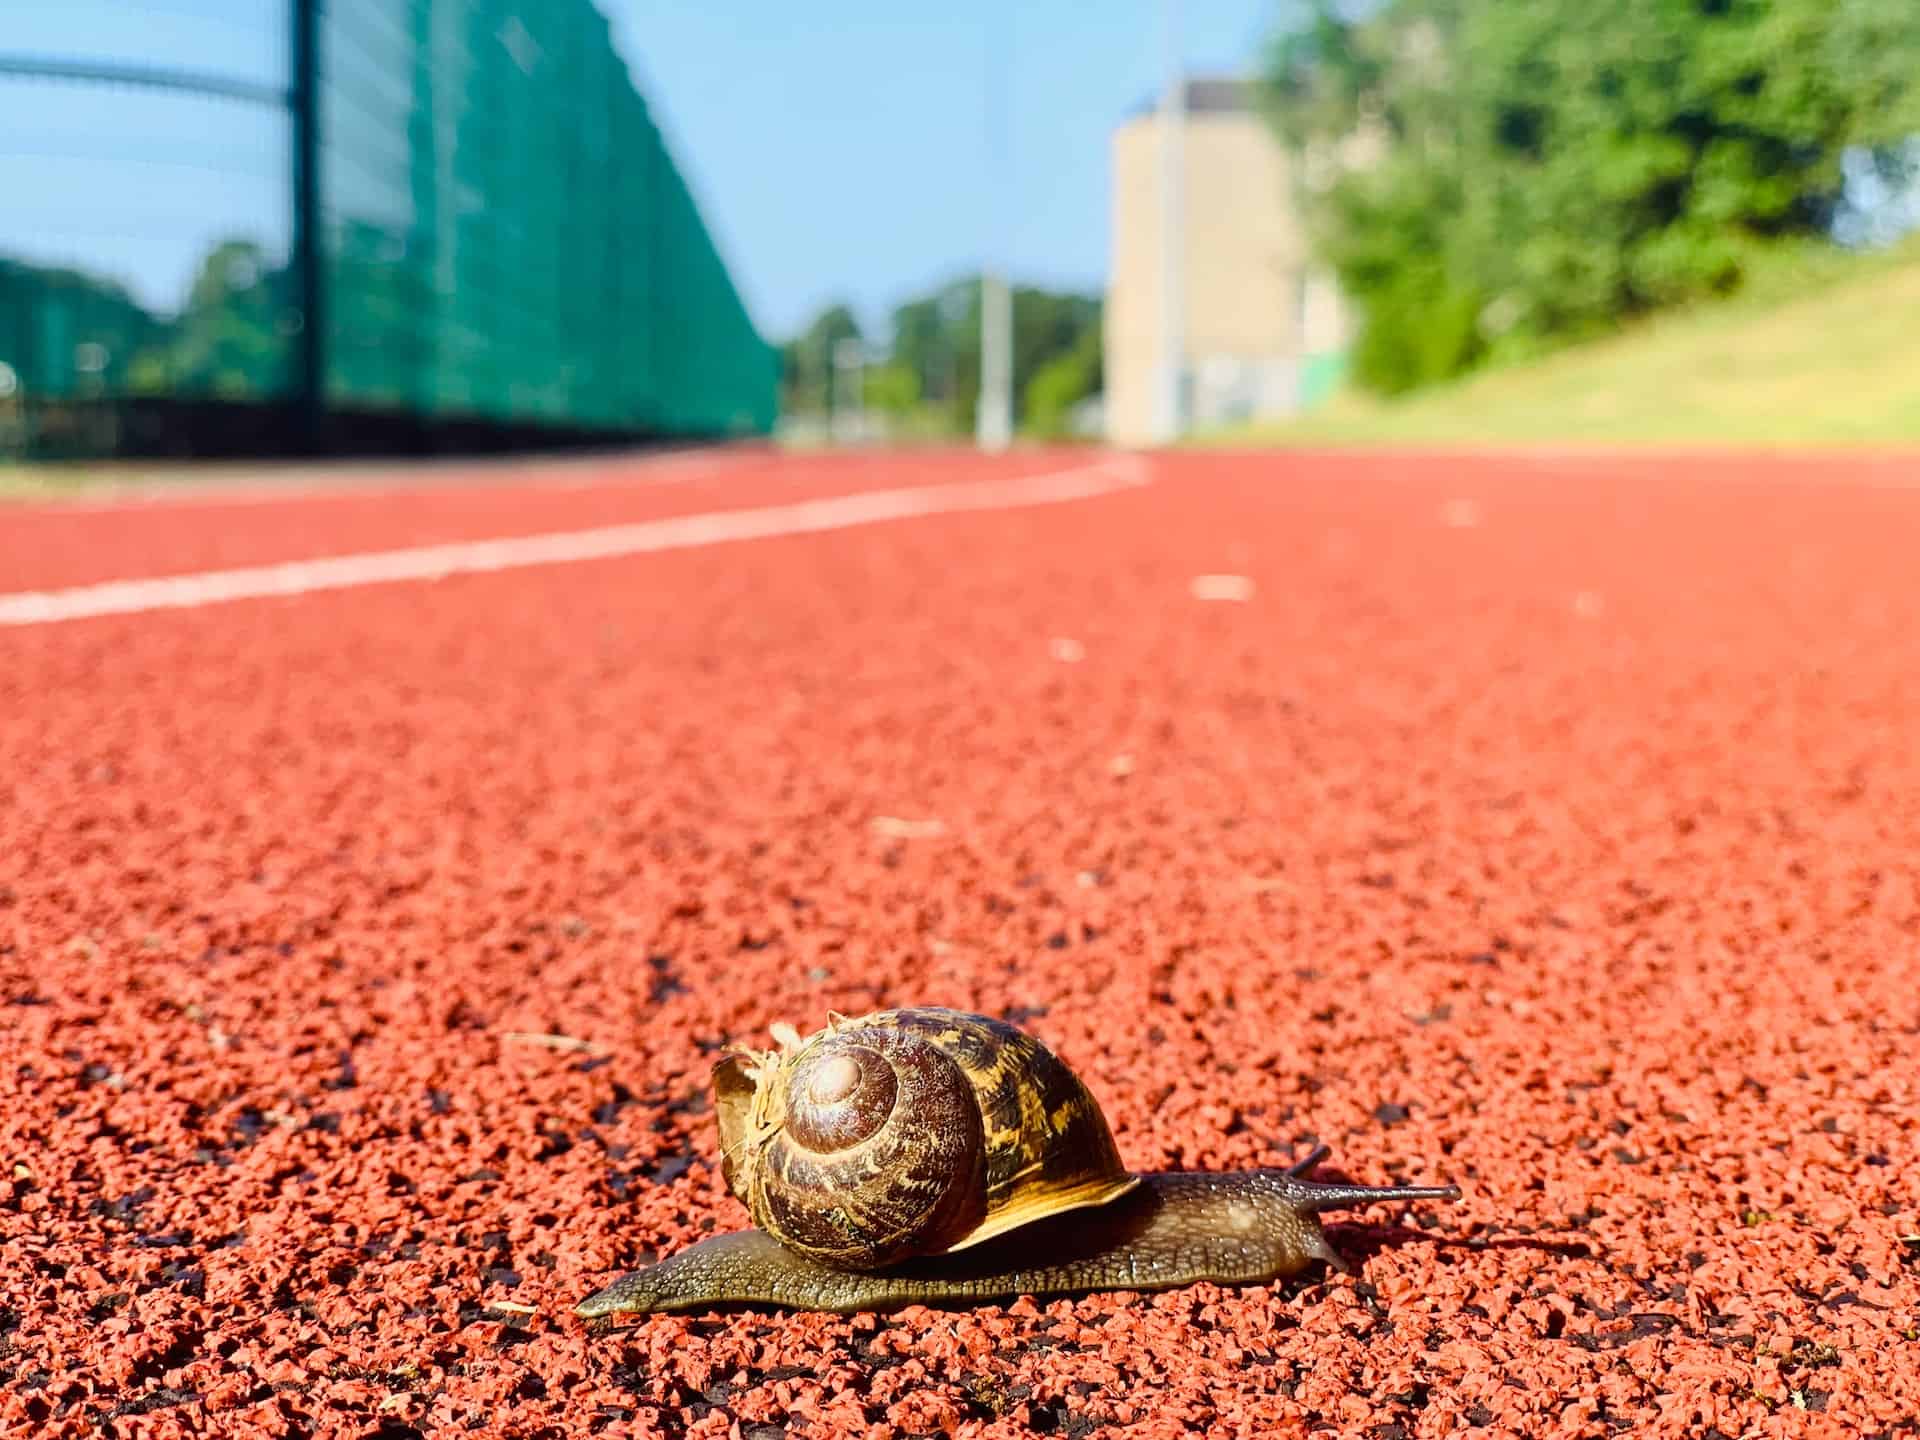 A snail makes its way across a red running track.